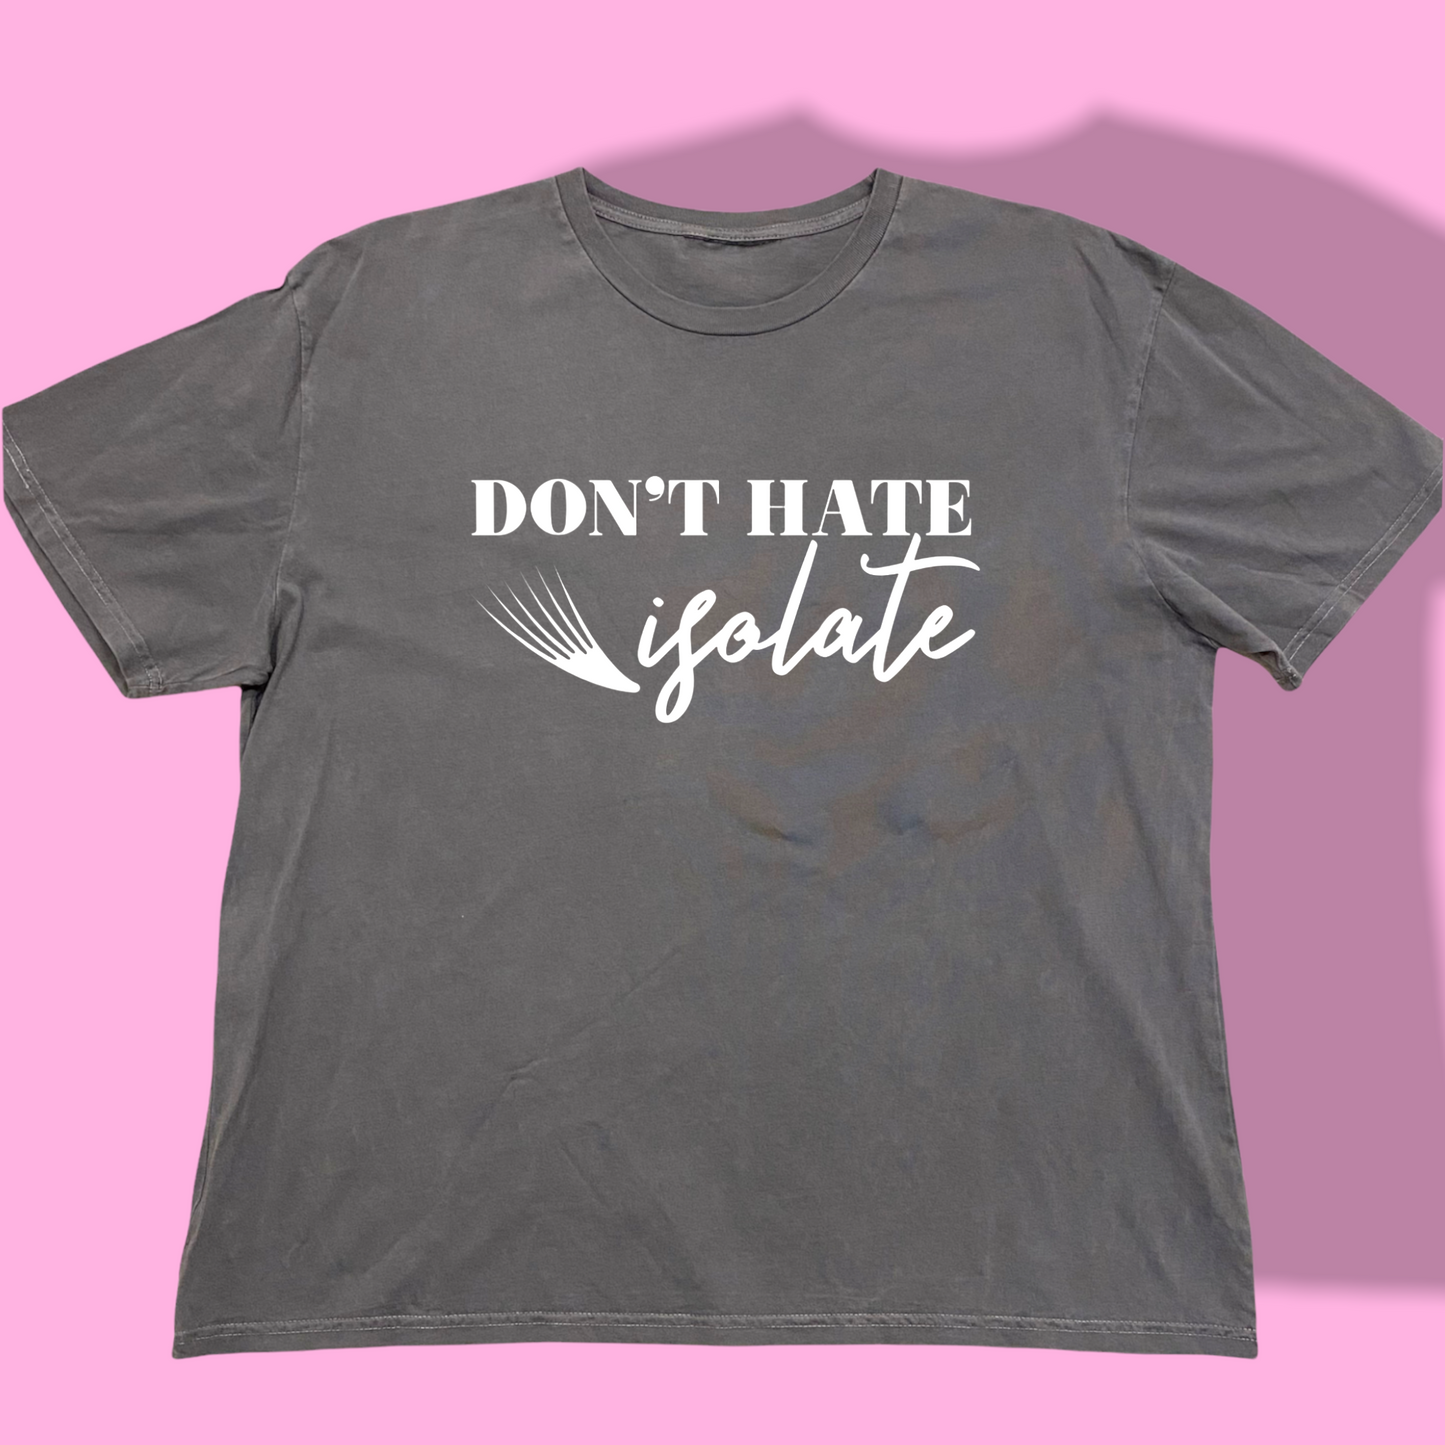 T-SHIRT- DON’T HATE, ISOLATE ( gray color | oversized tee, runs big)